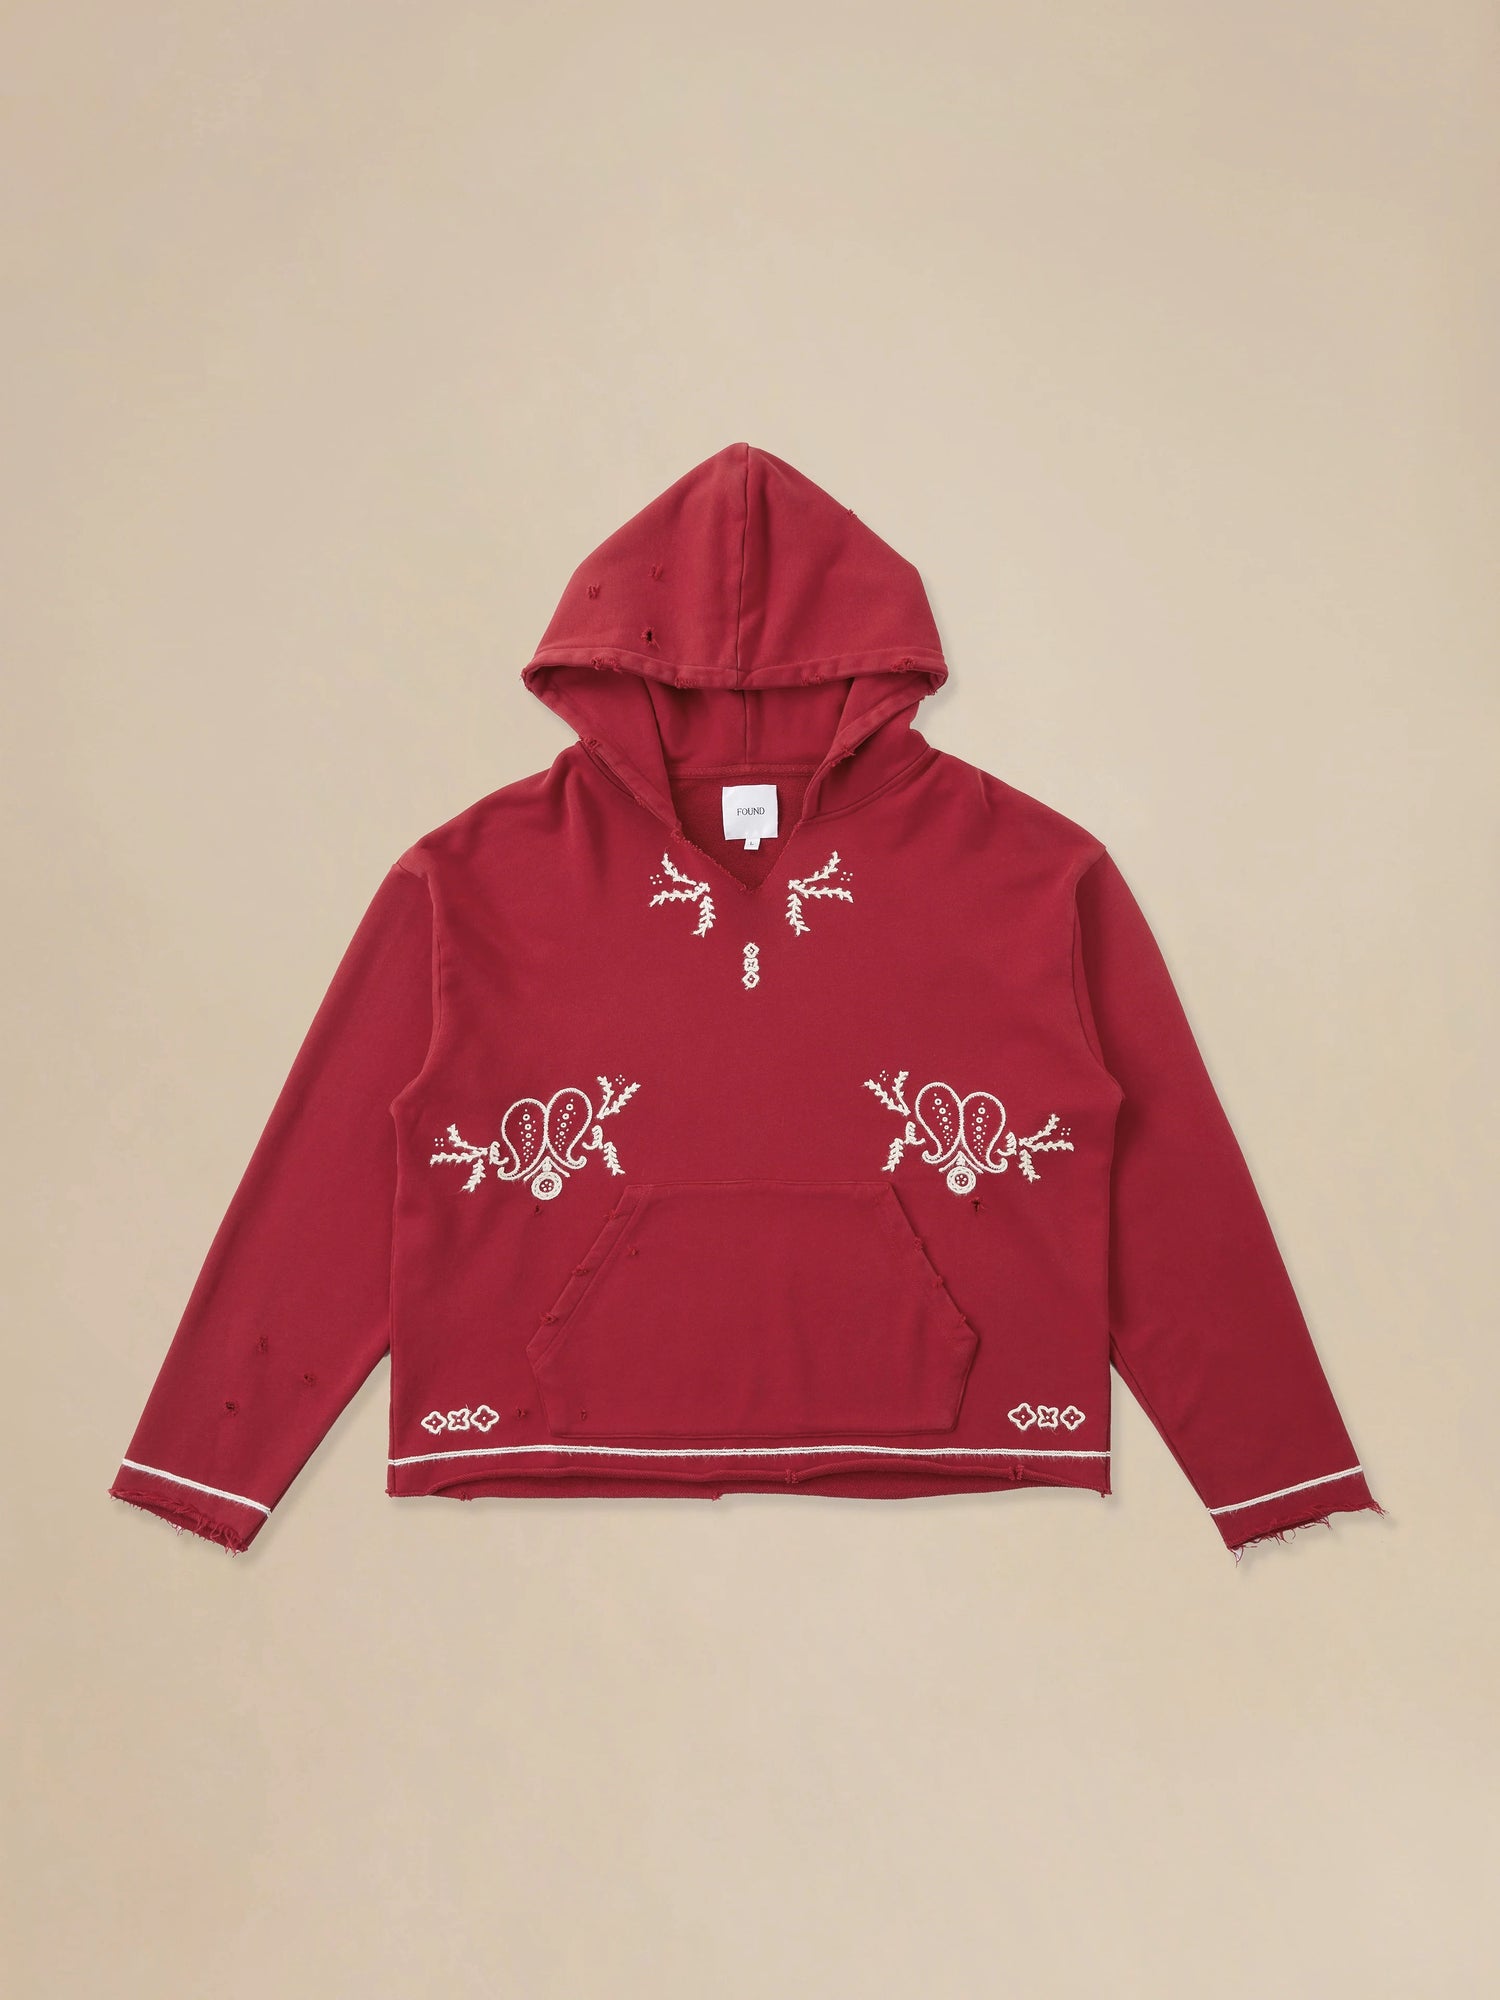 A Found Phulkari Embroidered Hoodie in red, inspired by the artistry of the Punjab region.